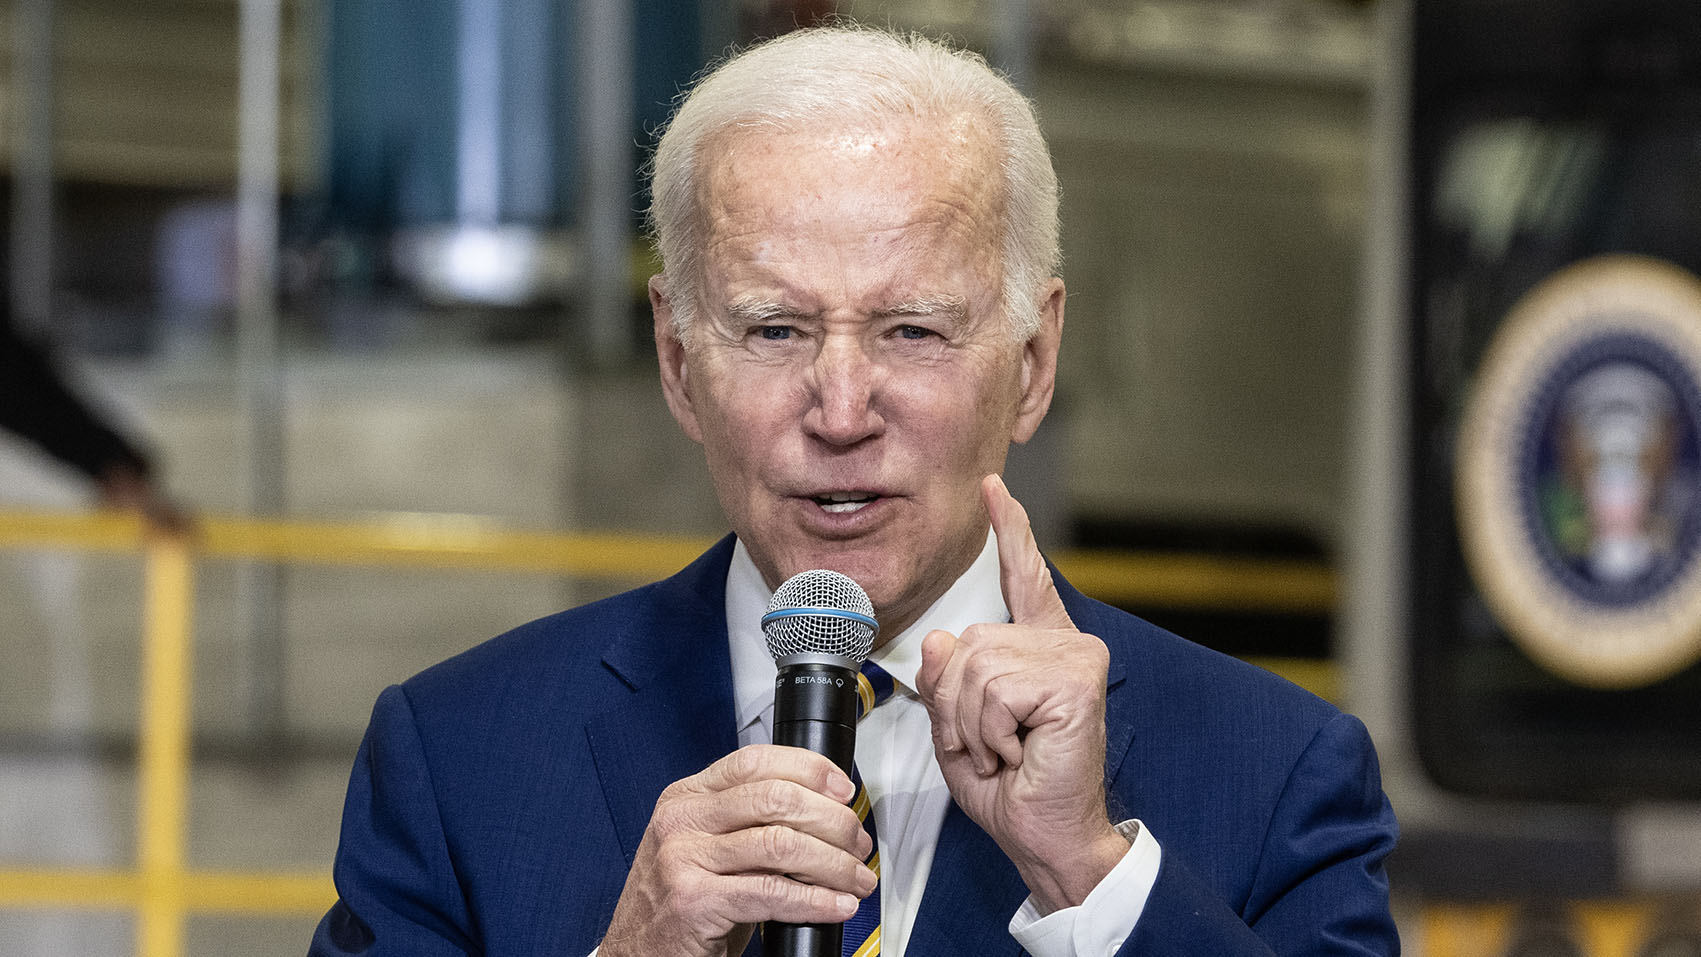 FBI Seizes Materials During Search Of Biden Vacation Home As Criminal Investigation Grows